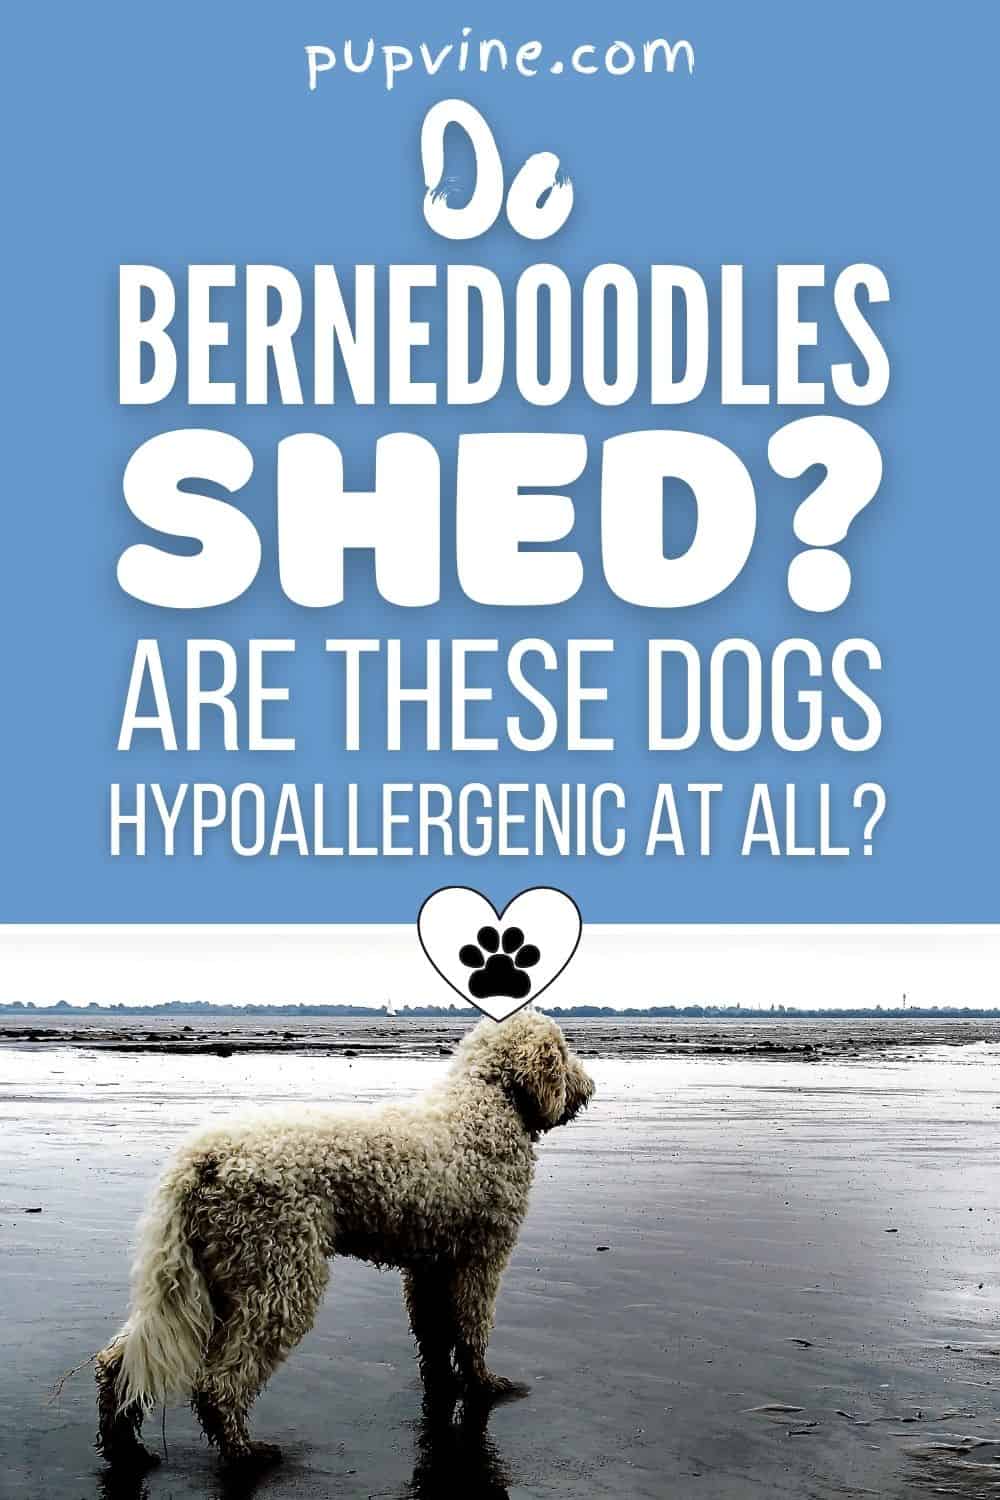 Do Bernedoodles Shed? Are These Dogs Hypoallergenic At All?